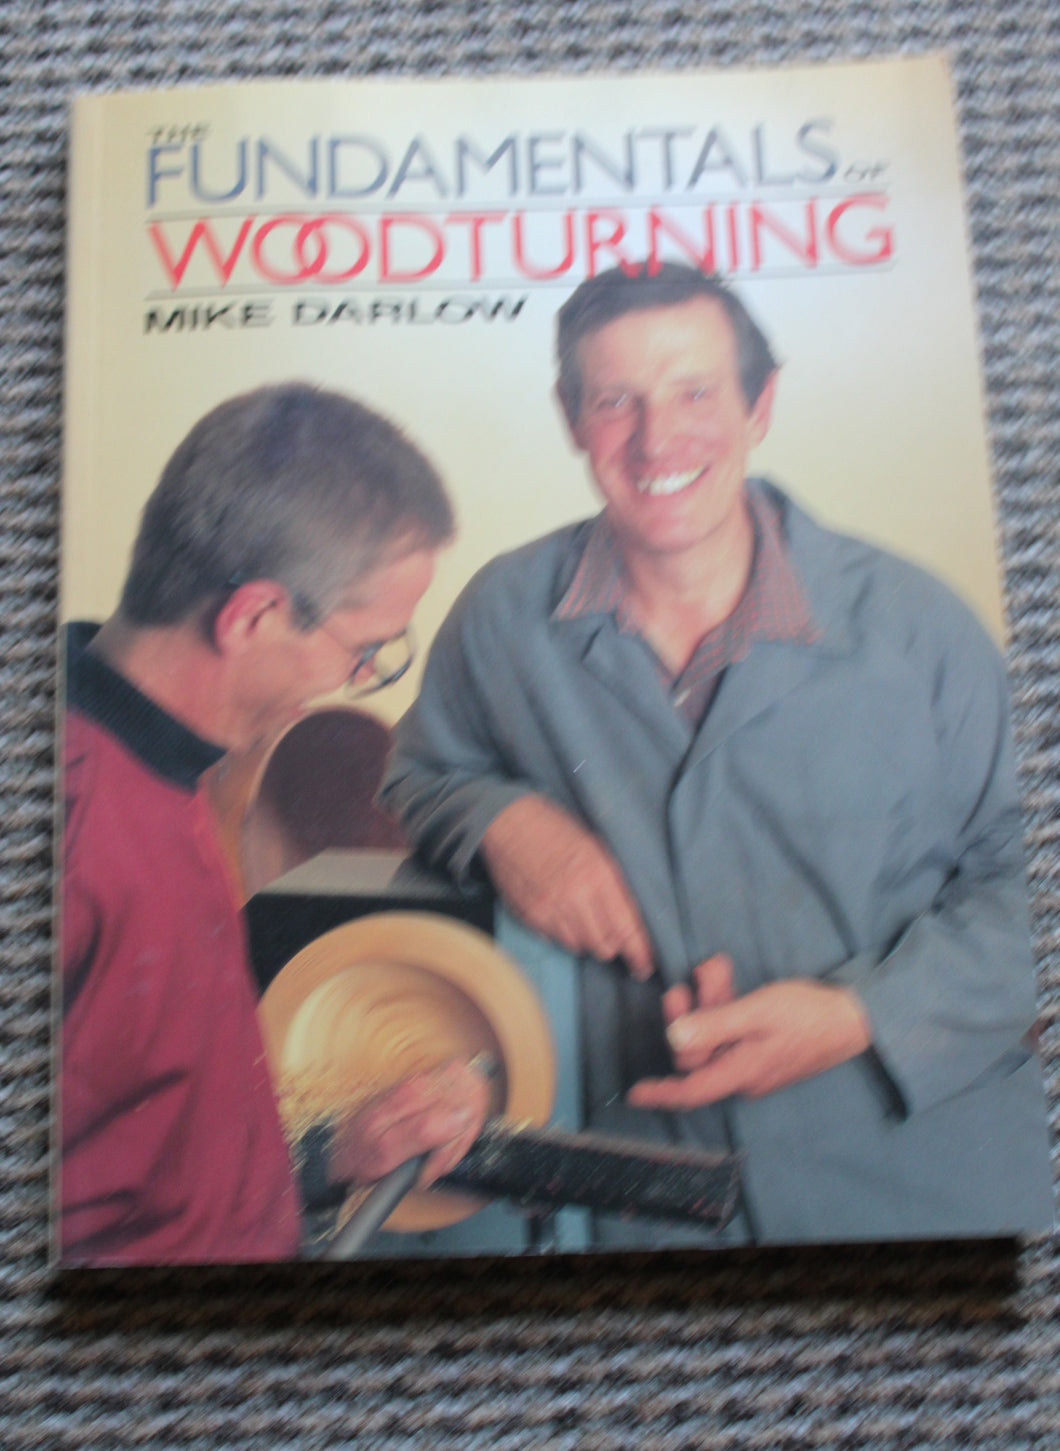 The Fundamentals of Wood Turning Mike Darlow